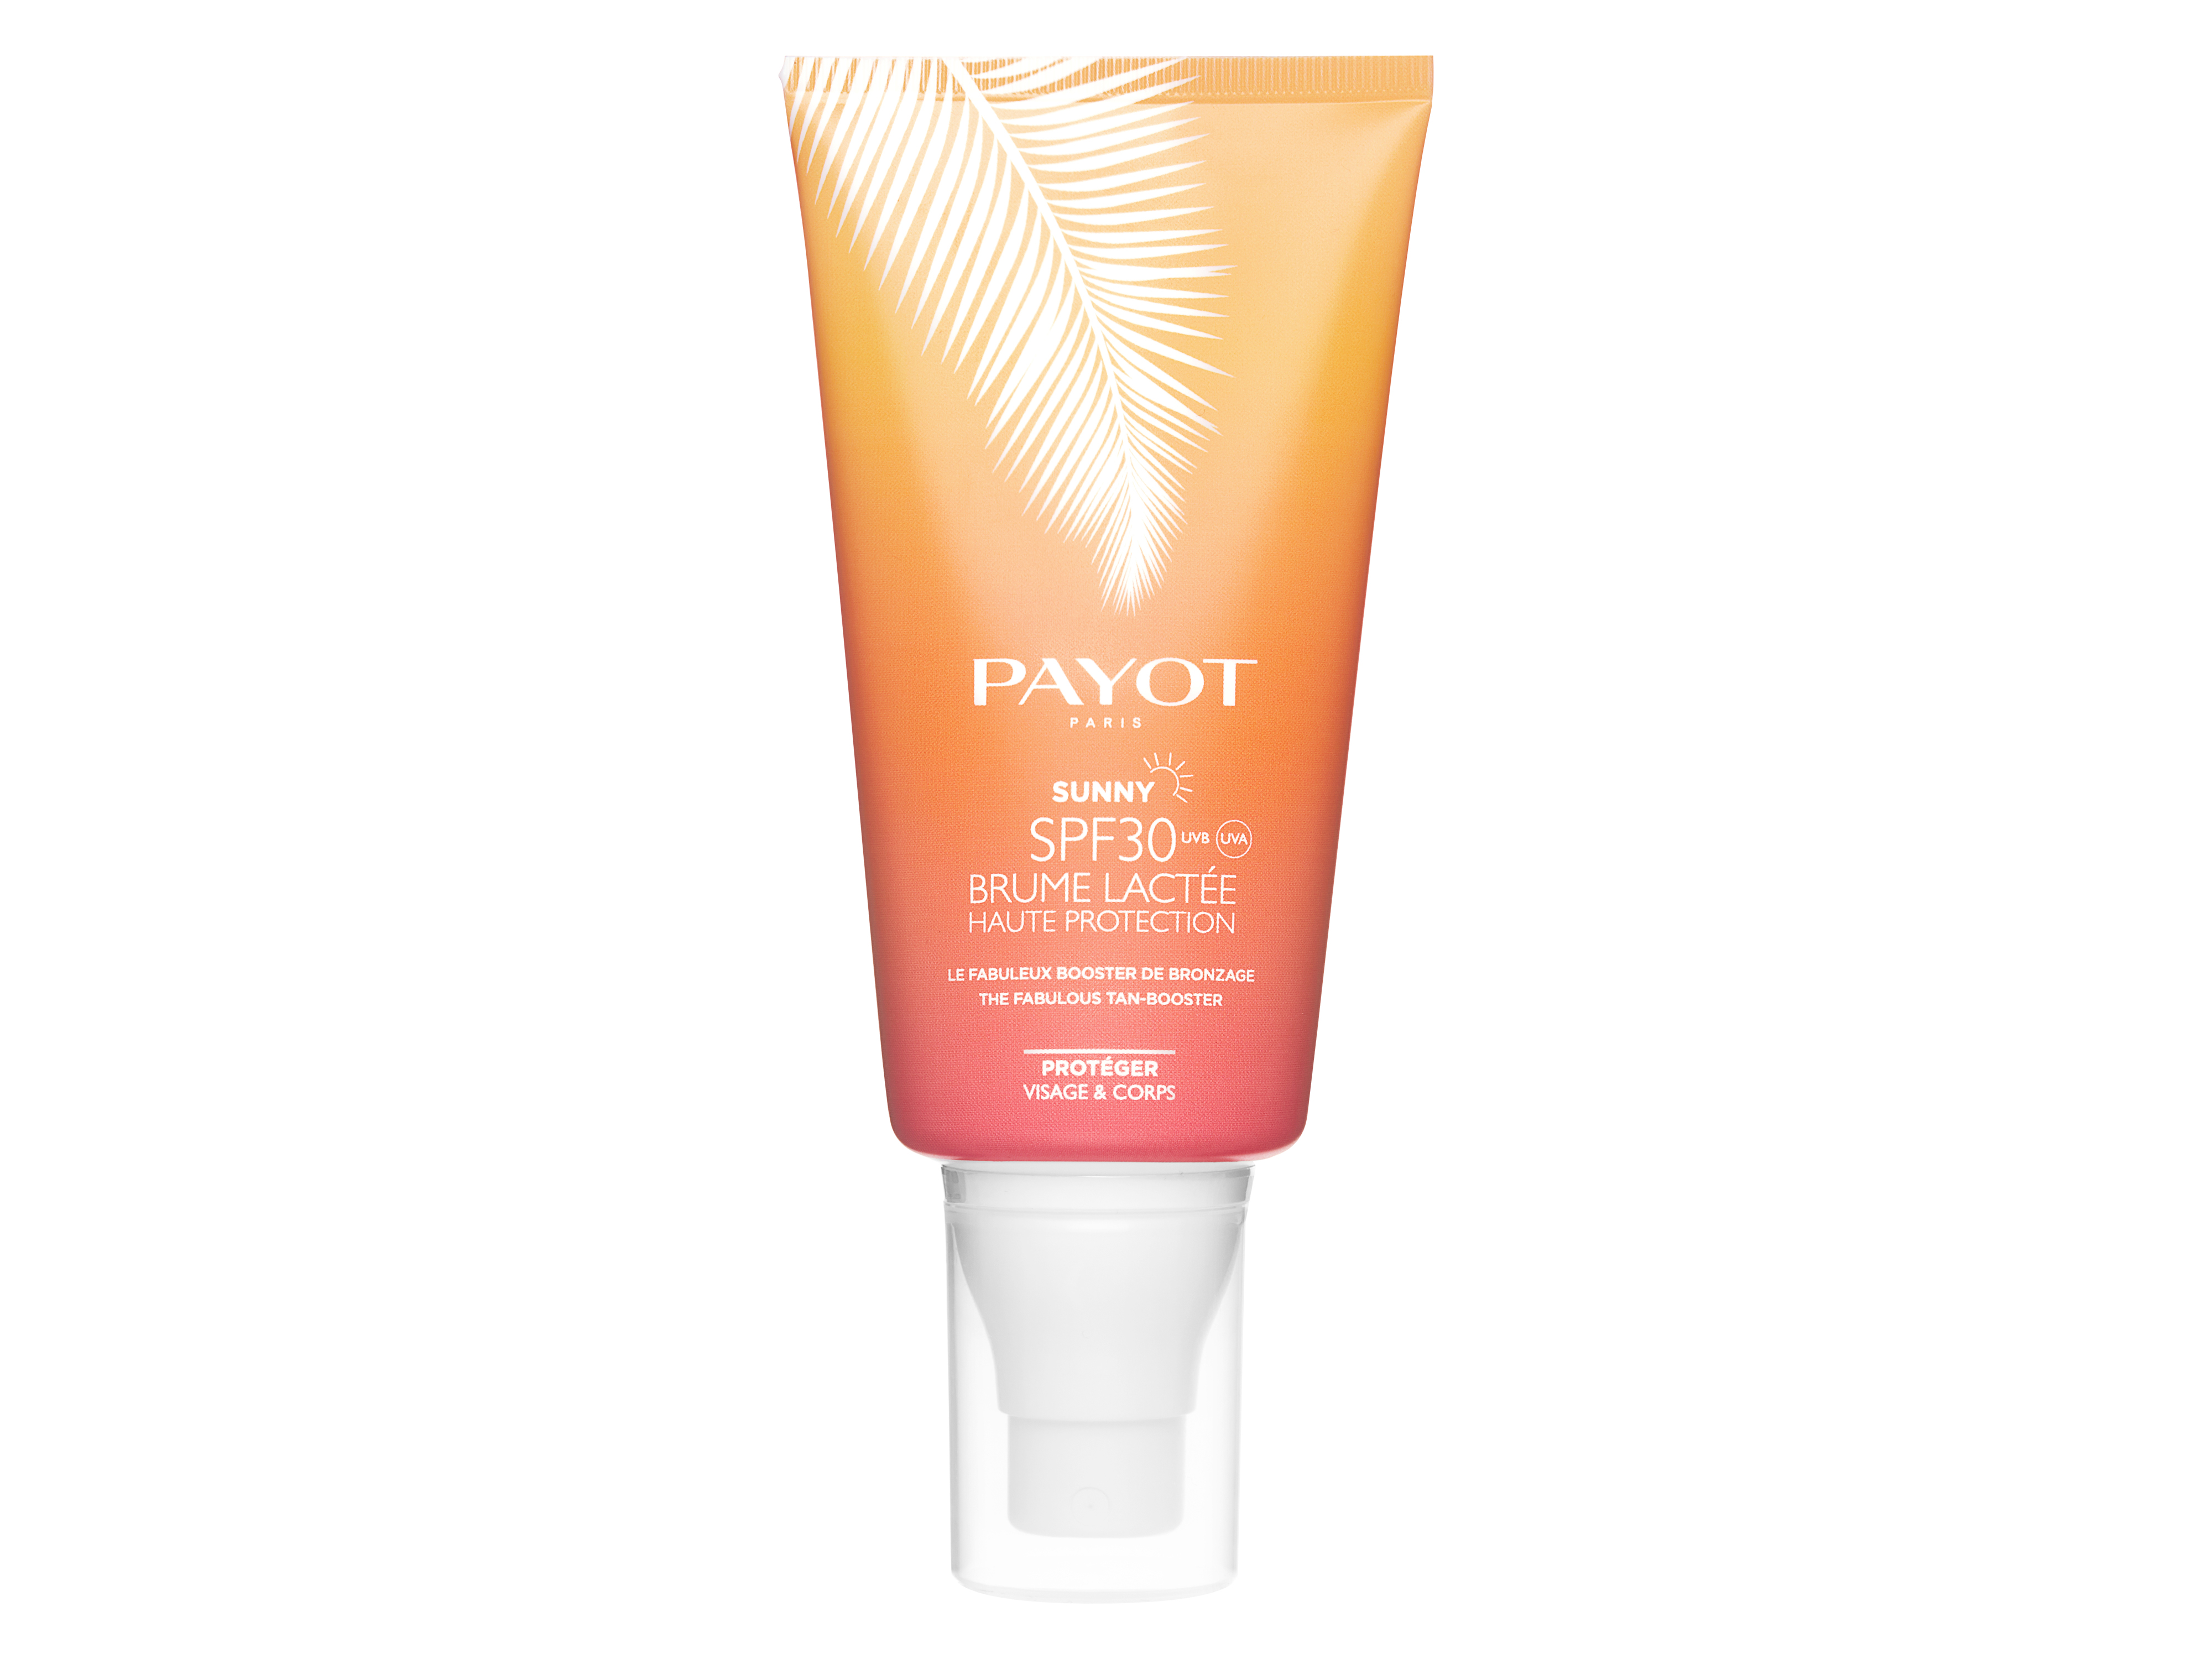 Payot Sunny Brume Lactée Face and Body, SPF 30, 150 ml